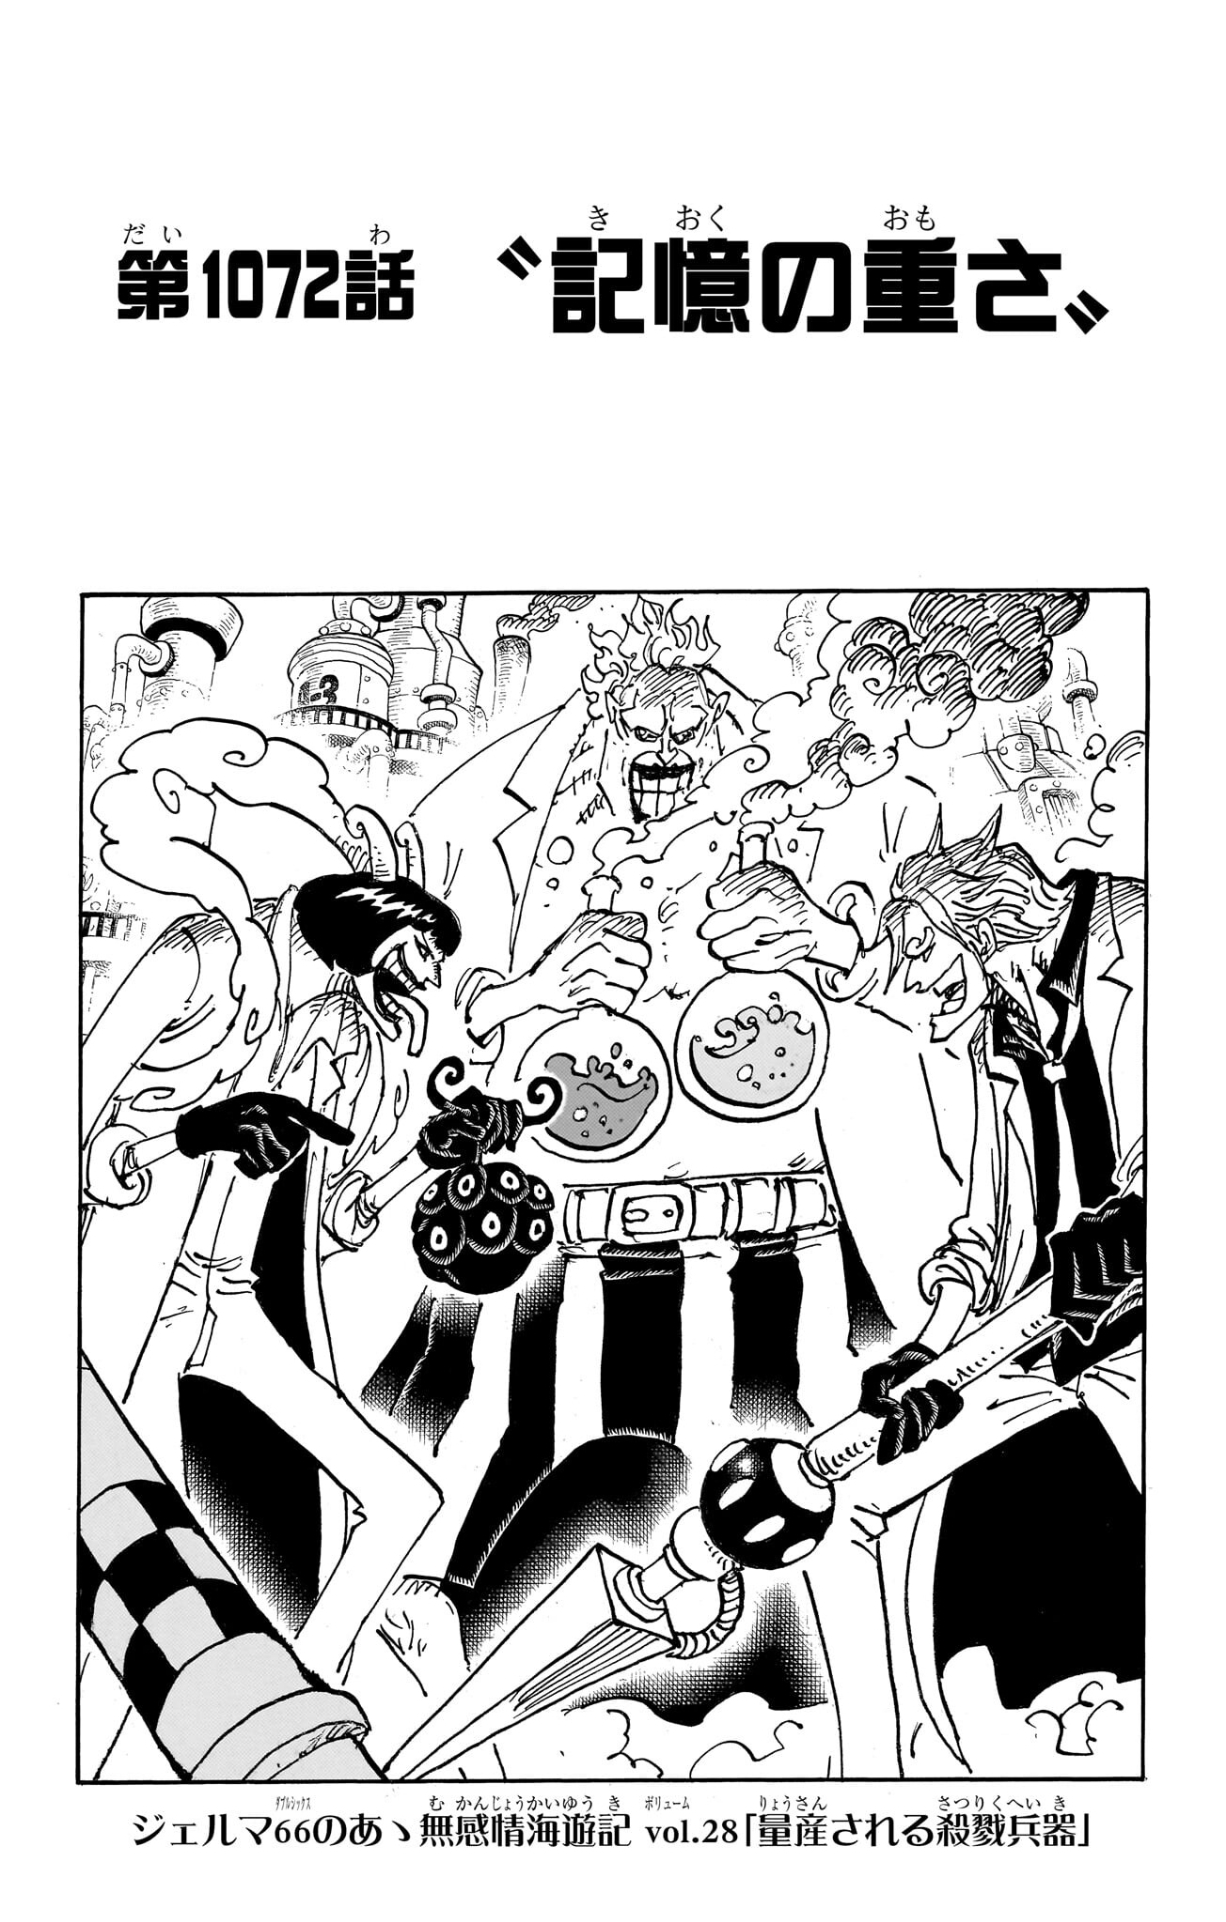 YOU'LL NEVER BELIEVE THIS (Full Summary) / One Piece Chapter 1072 Spoilers  